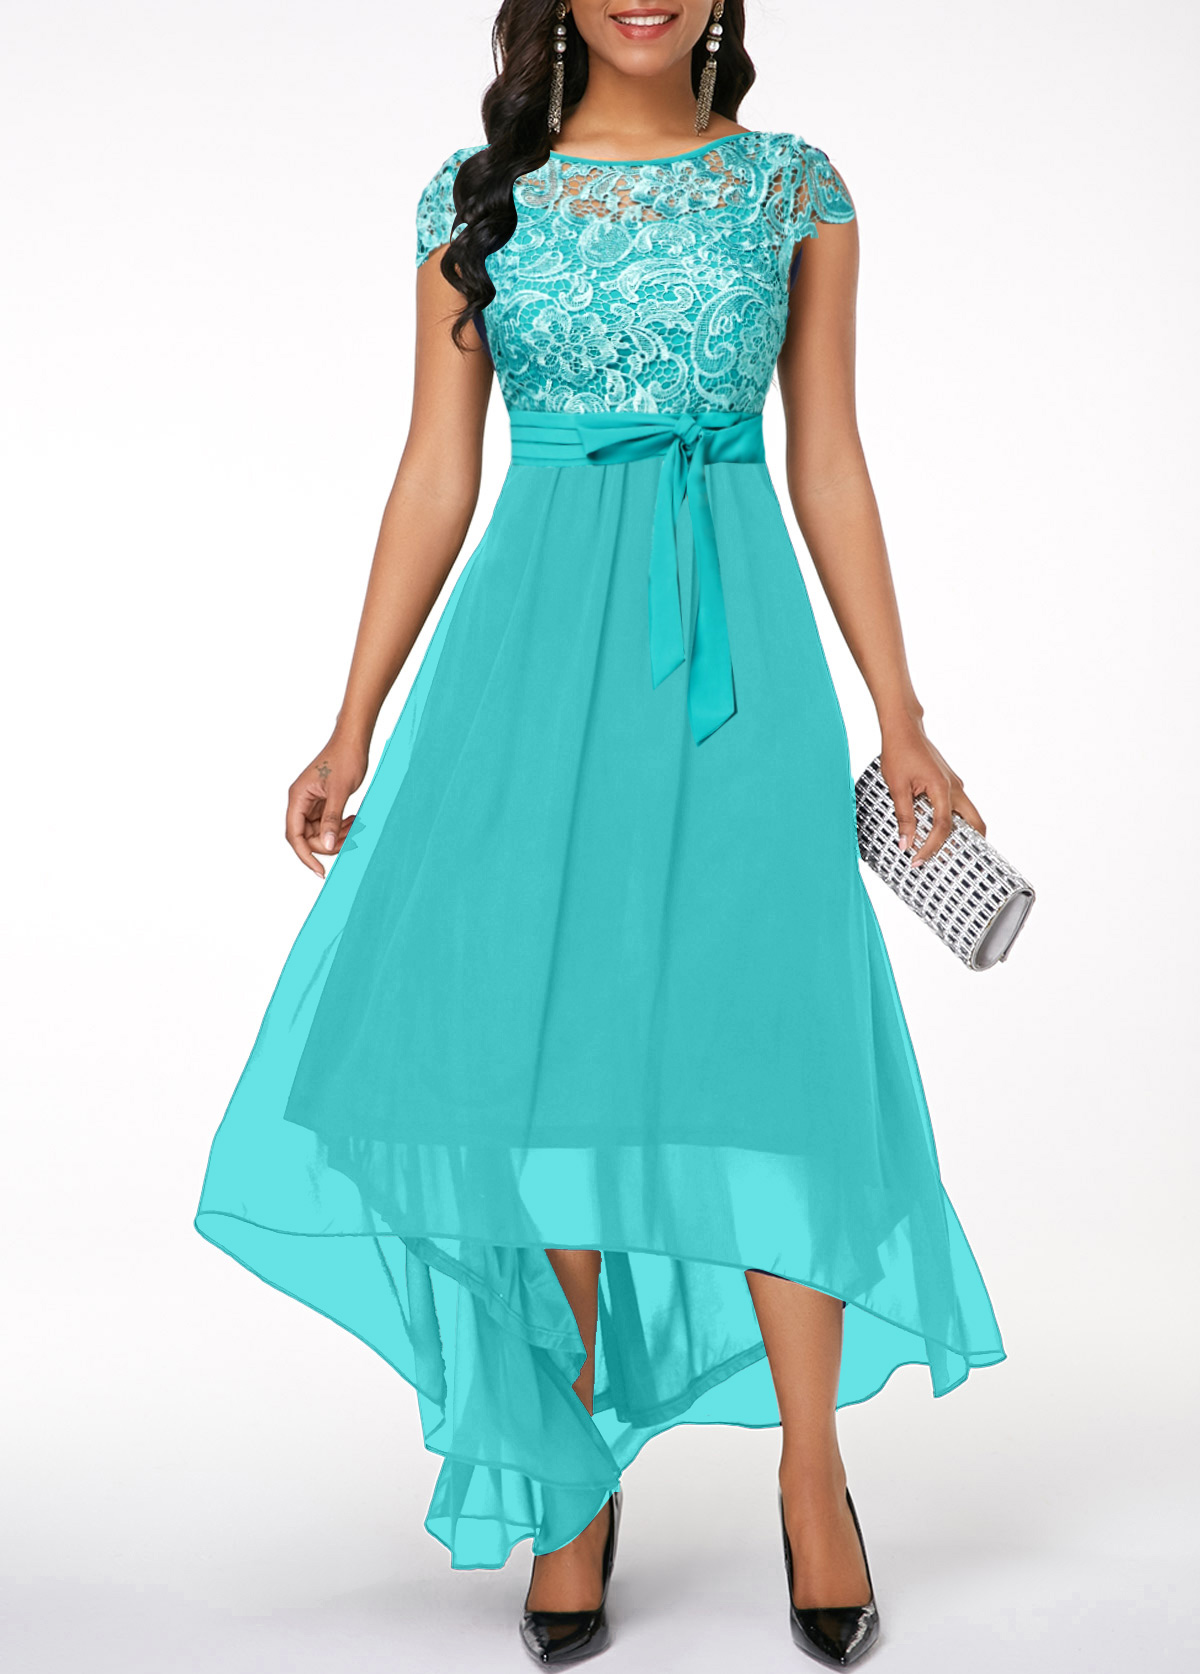 Mint Green High Low Boat Neck Lace Dress